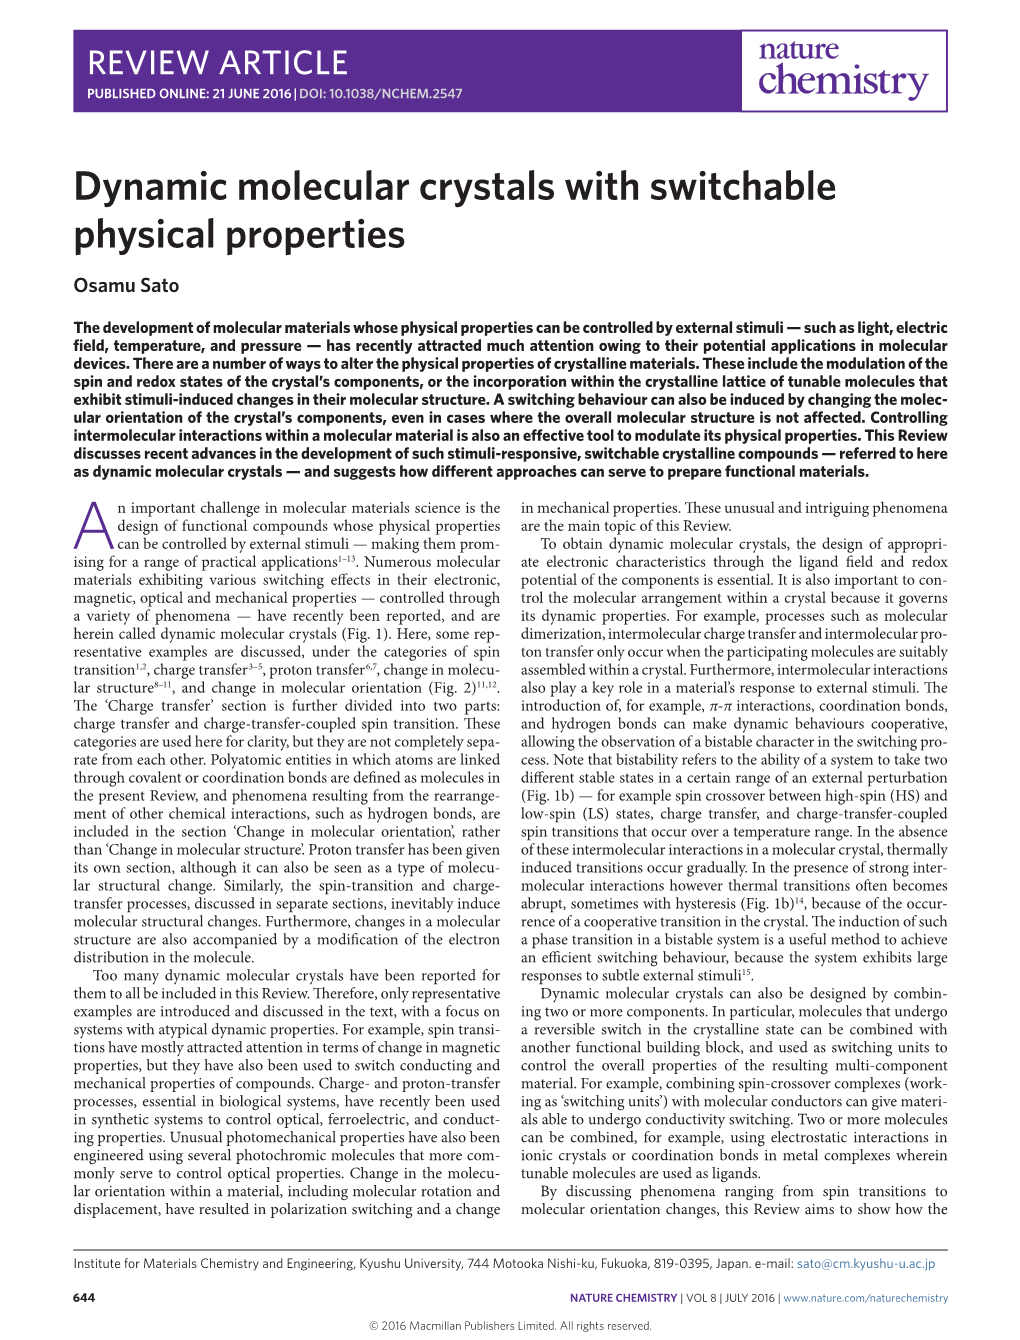 Dynamic Molecular Crystals with Switchable Physical Properties Osamu Sato